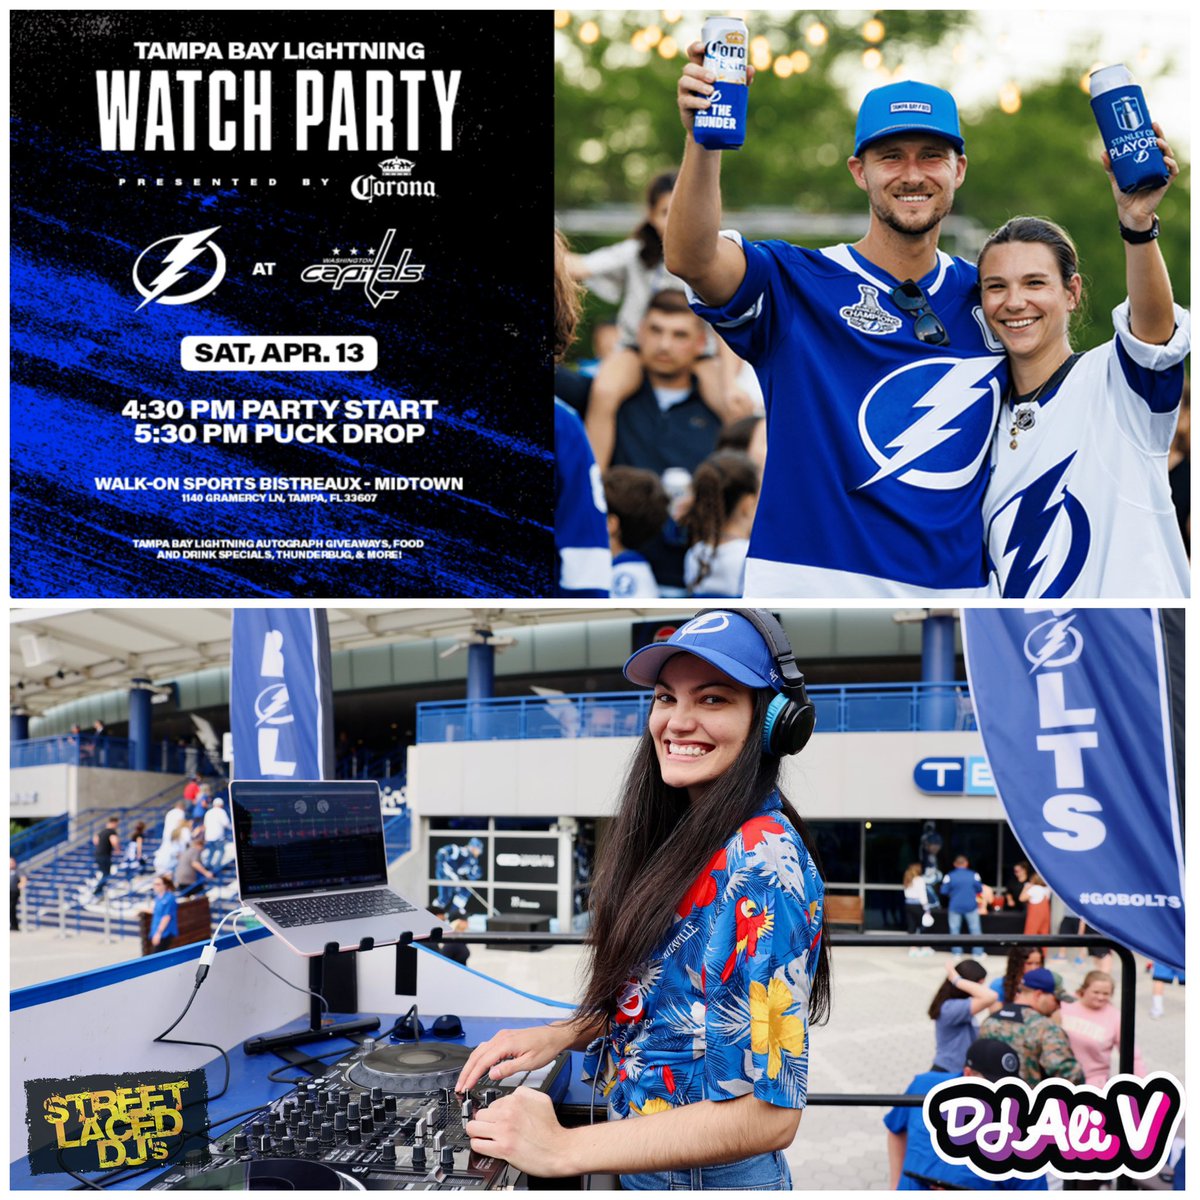 Hey #BoltsNation⚡️!
We hope you can join us TOMORROW for the official @TBLightning Watch Party powered by @CoronaUSA at Walk-On’s in @MidtownTampa! #StreetLacedDJs own Ali V on vibe w/@ThunderBugTBL, @TBLRollingTHNDR, #BoltsBlueCrew & You! 4:30pm start, 5:30p puck drop! #GoBolts